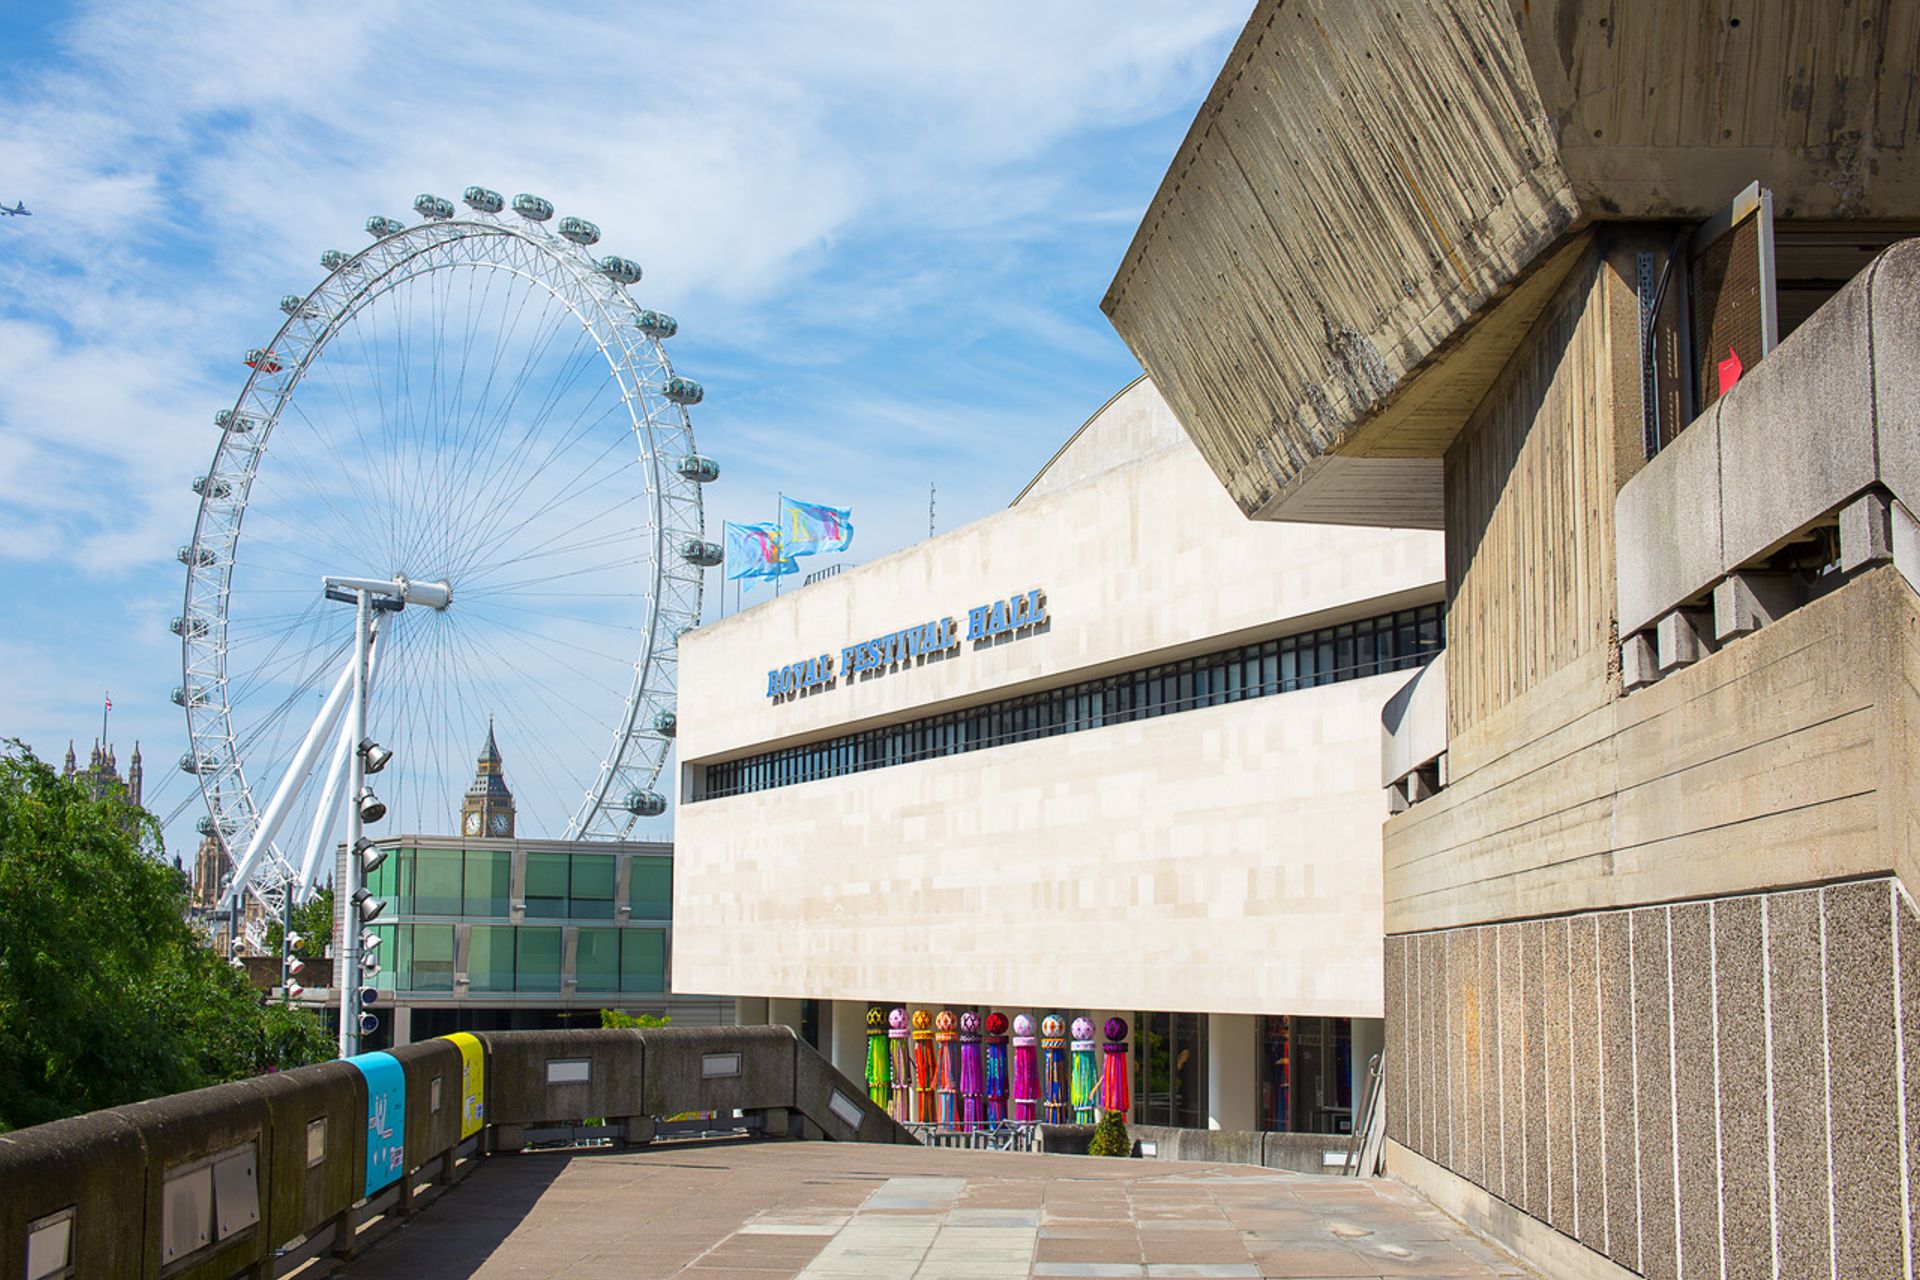 Consultations with Southbank Centre staff is starting this week Image courtesy of the Southbank Centre